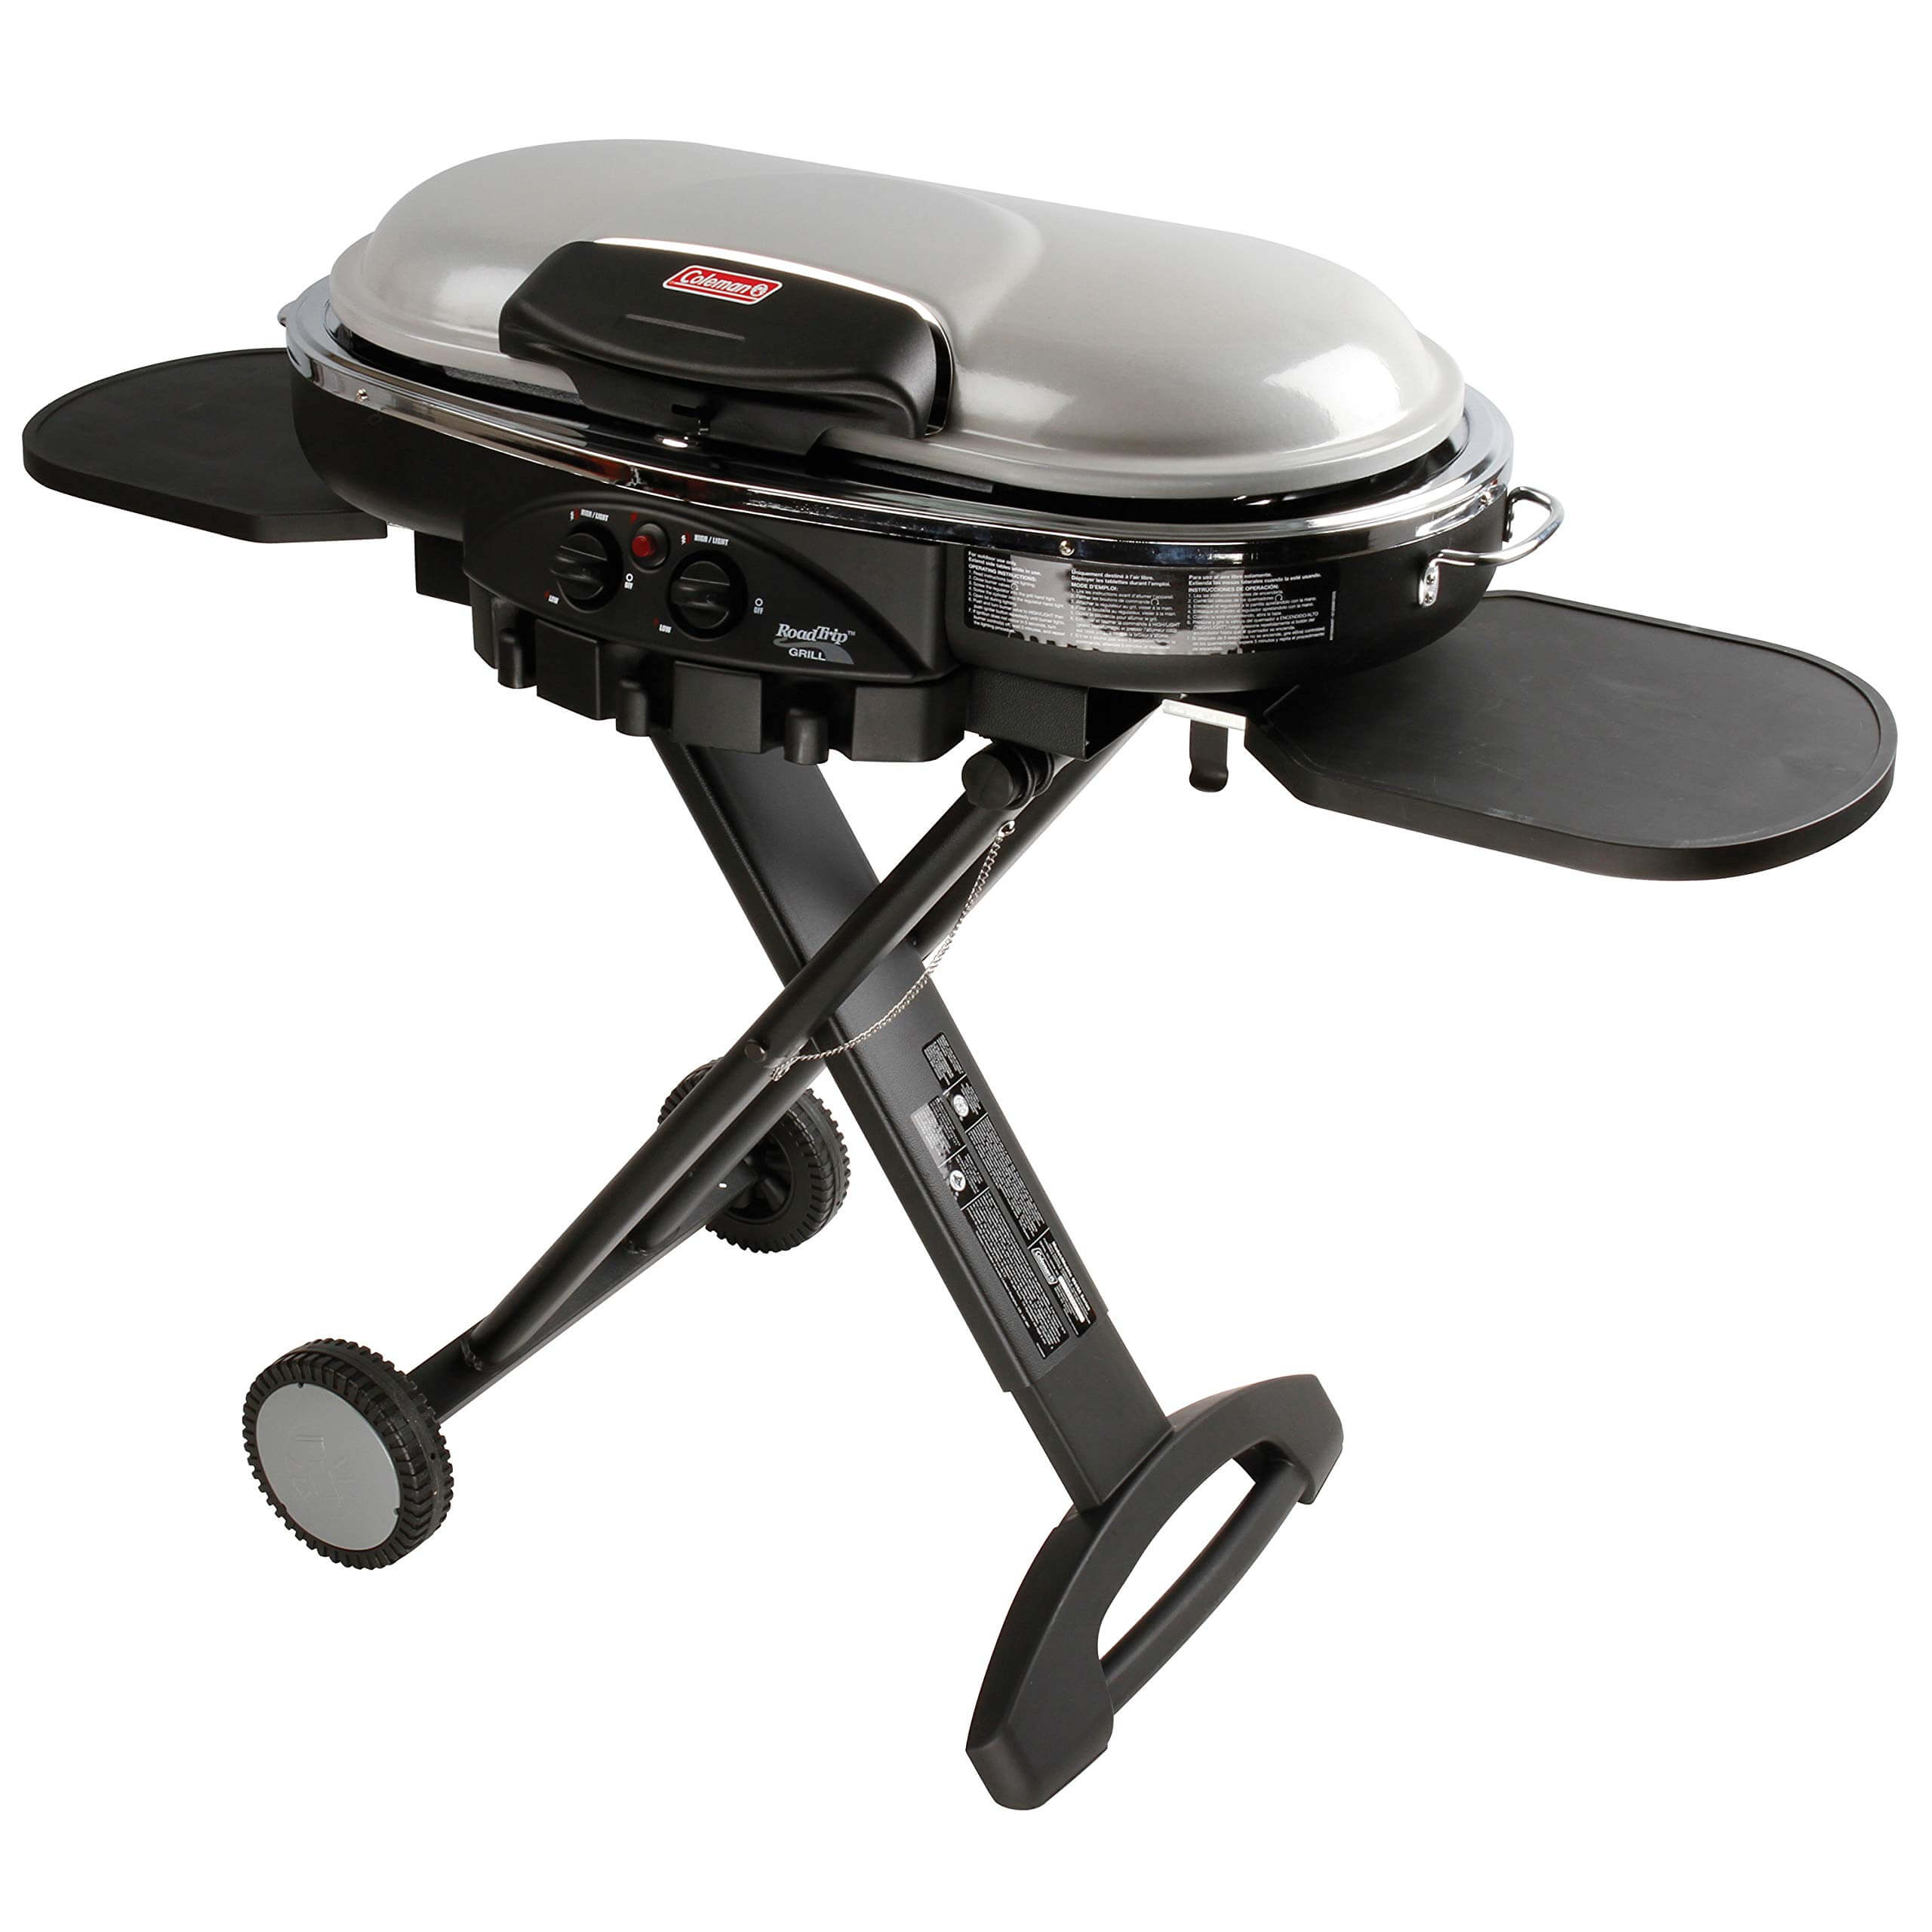 best gas grill under $200, Coleman Road Trip LXE Portable Gas Grill, best charcoal grills under $300, best 4 burner gas grill, Best Gas Grill under $300 for Delicious and Easy Home Grilling